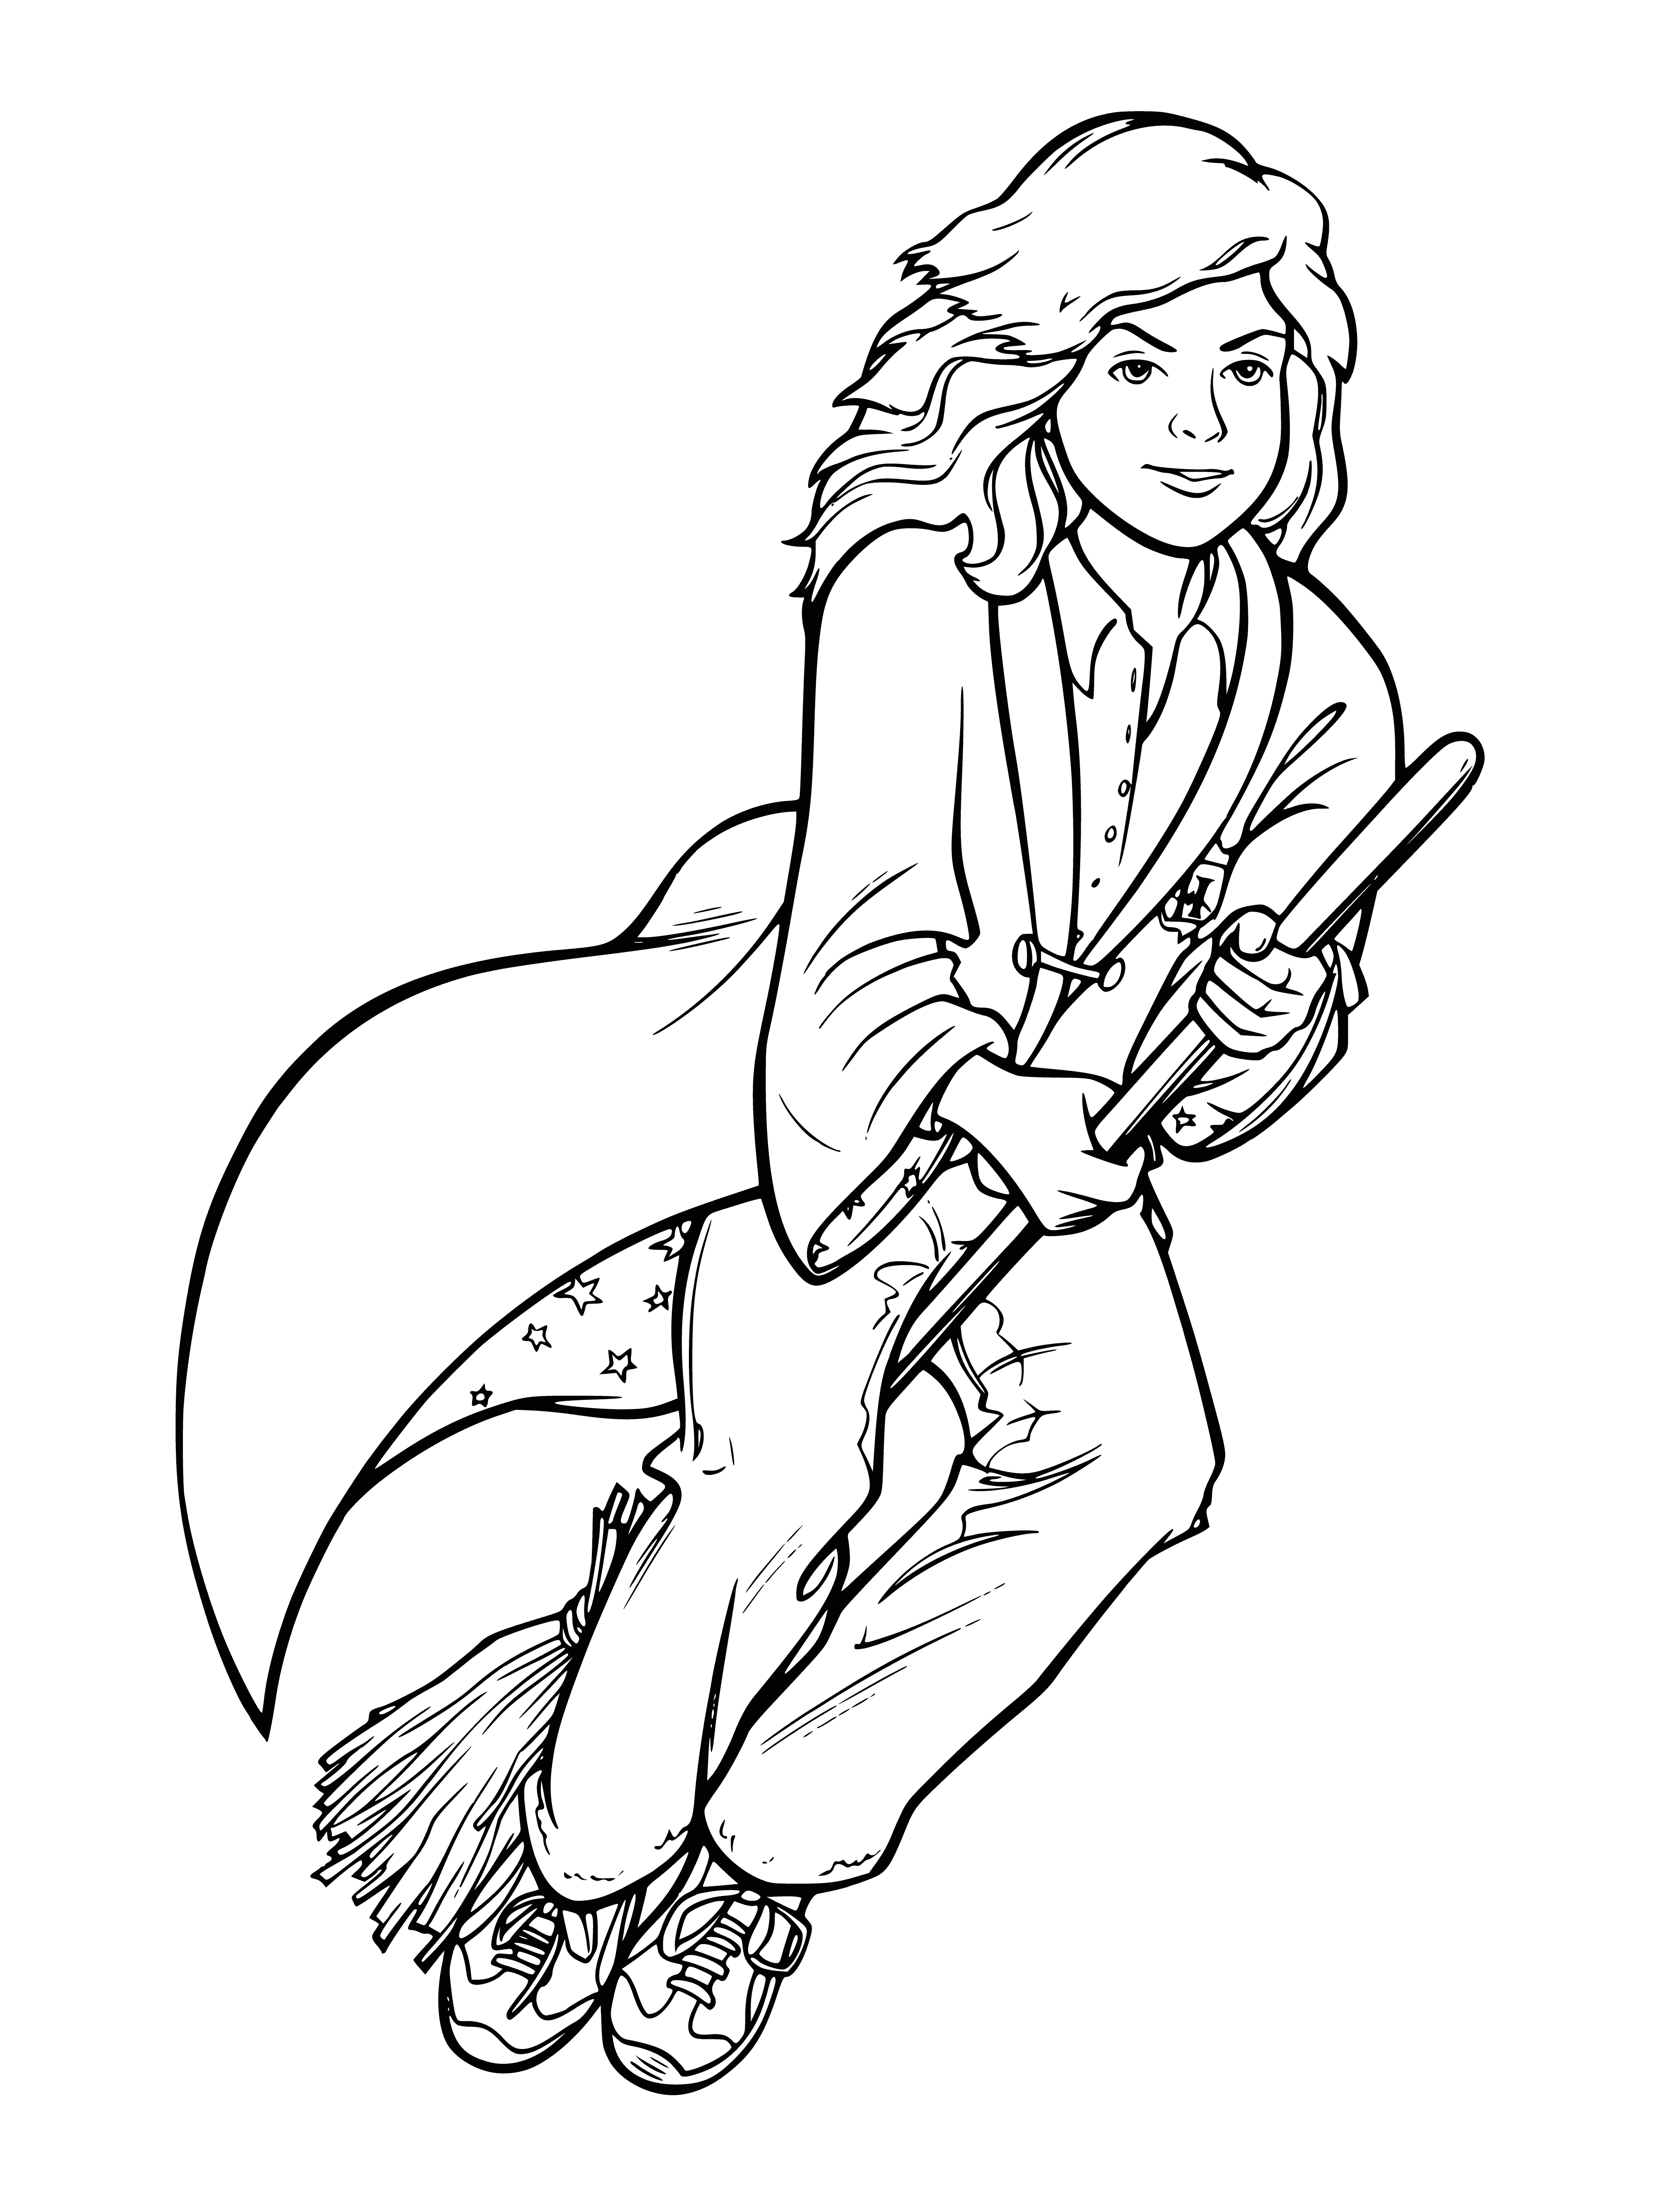 Hermione on a broom coloring page